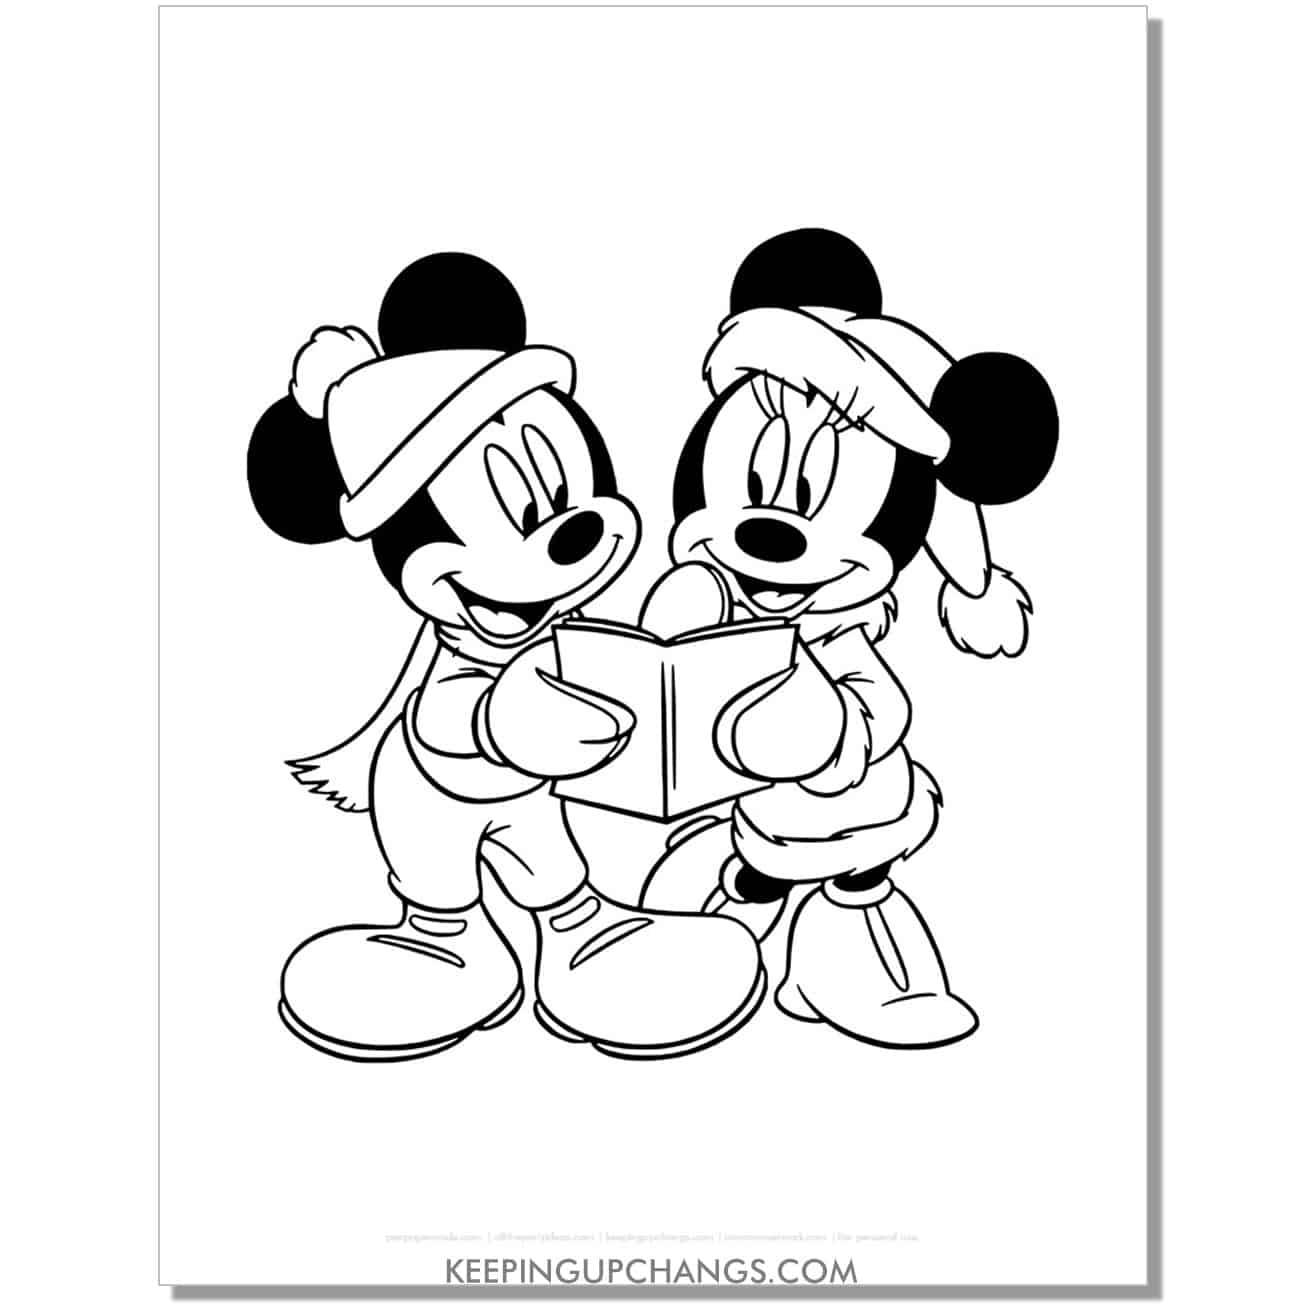 free minnie, mickey mouse singing christmas carols coloring page, sheet.